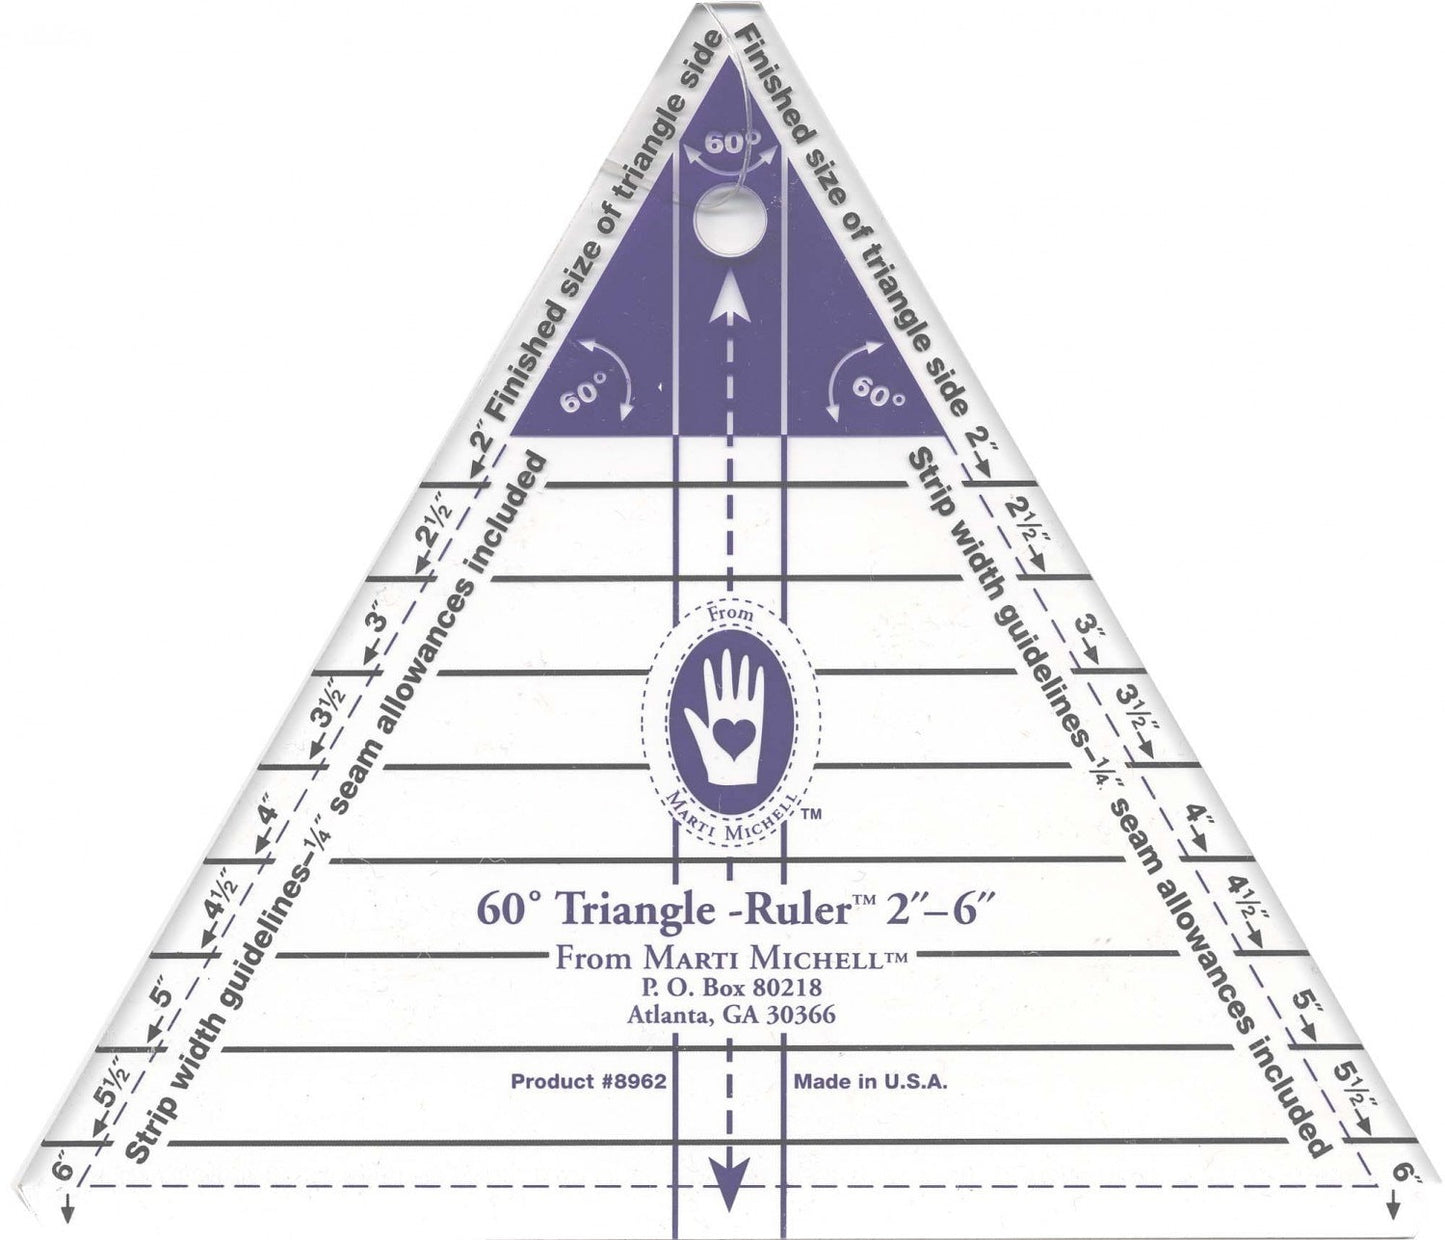 60-Degree Triangle Quilters' Ruler - (2" - 6") makes perfect equilateral triangle cuts for quilting and crafts